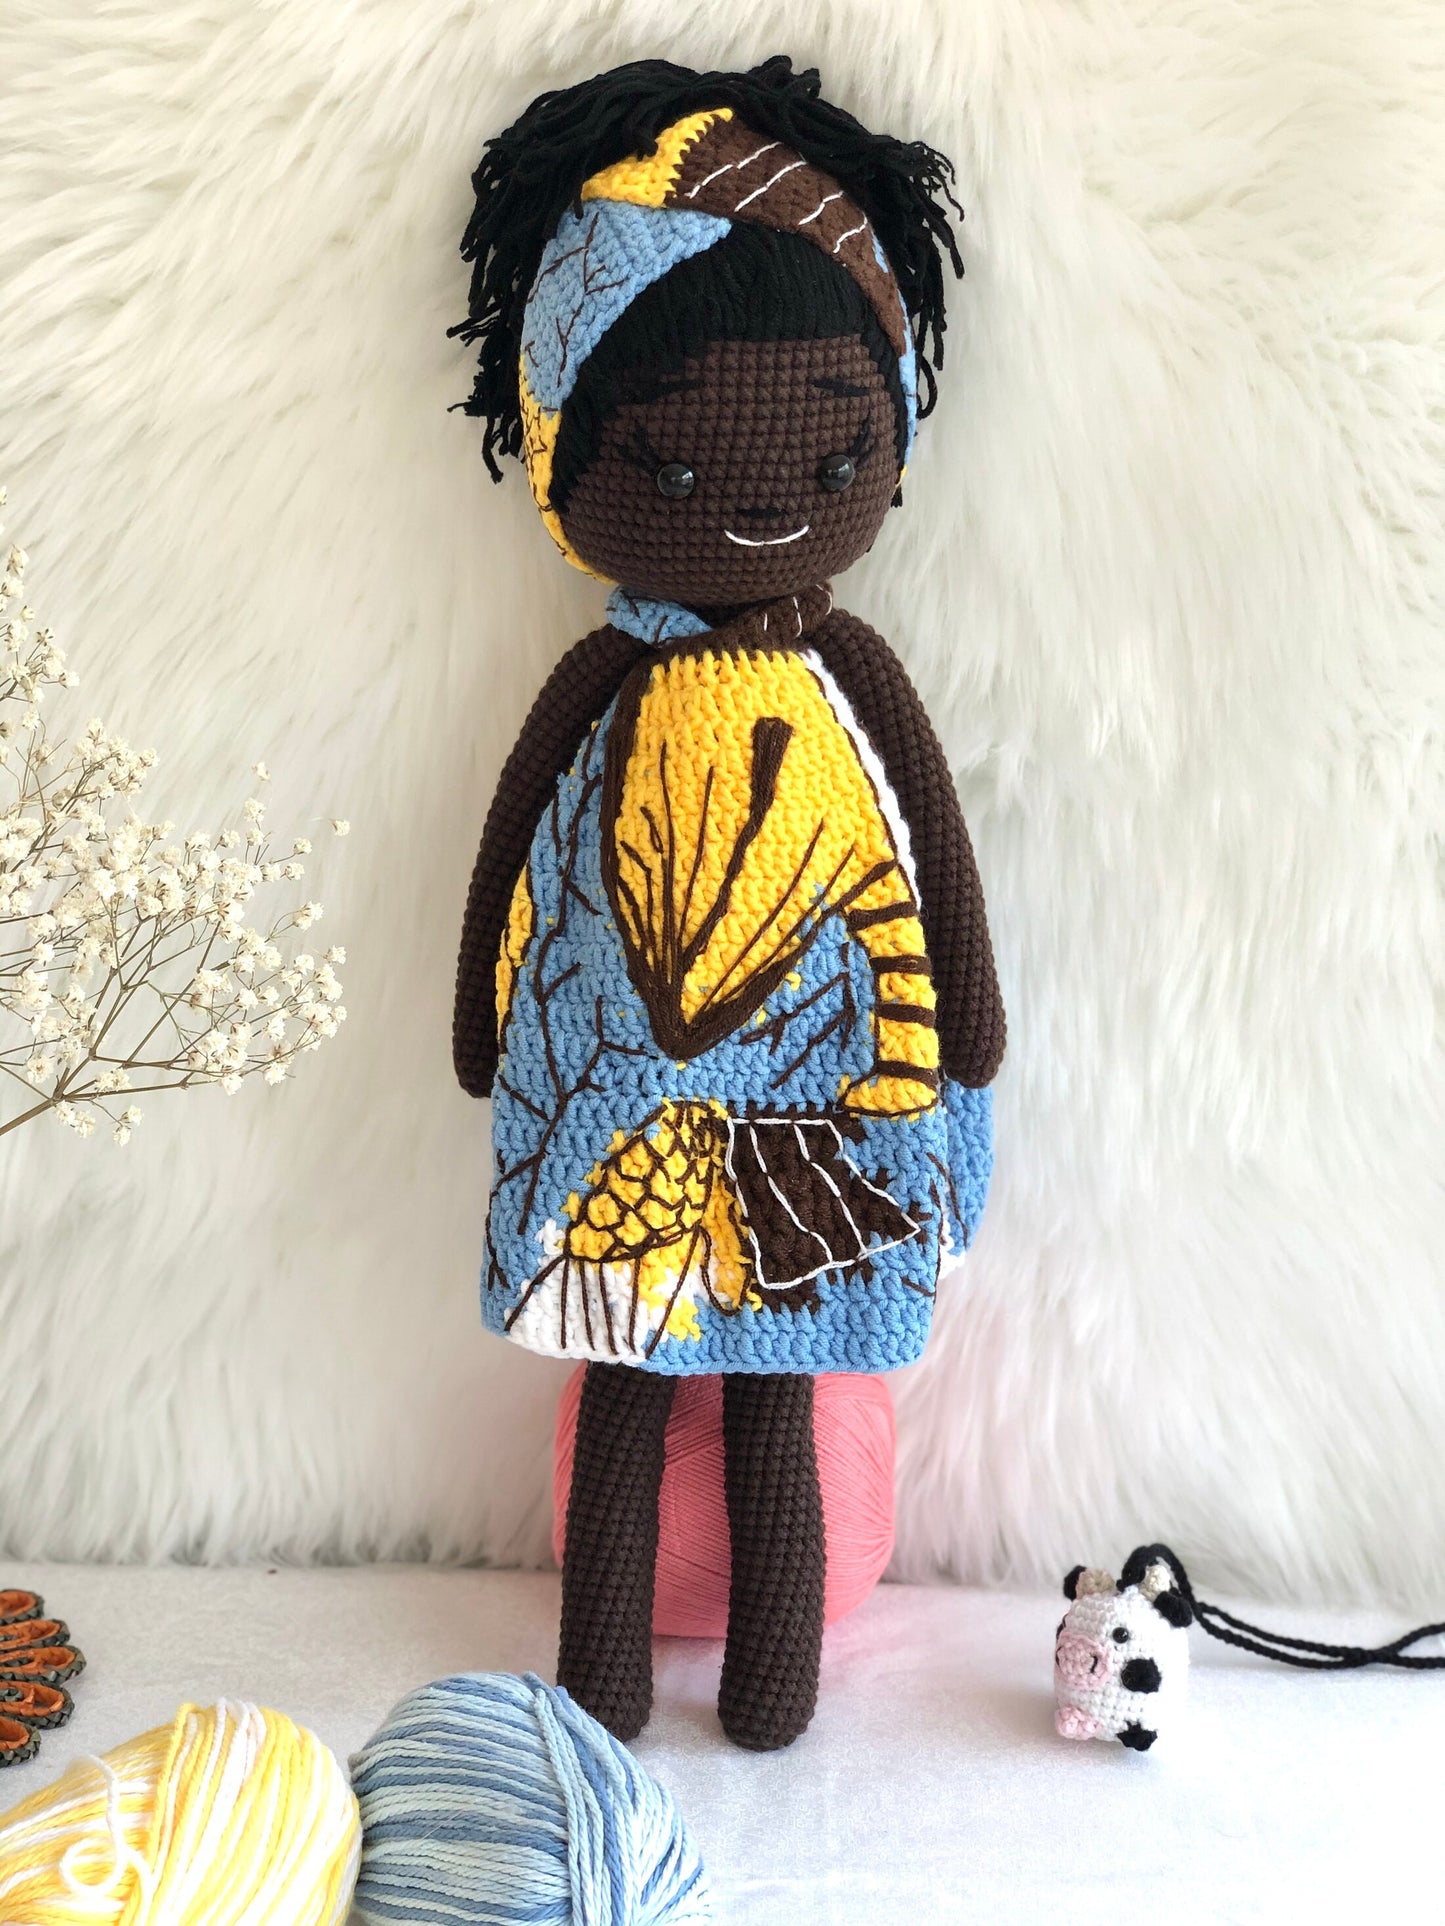 Handmade doll crochet, amigurumi African American, cute, soft toy for baby, toddler, kid, adult hobby